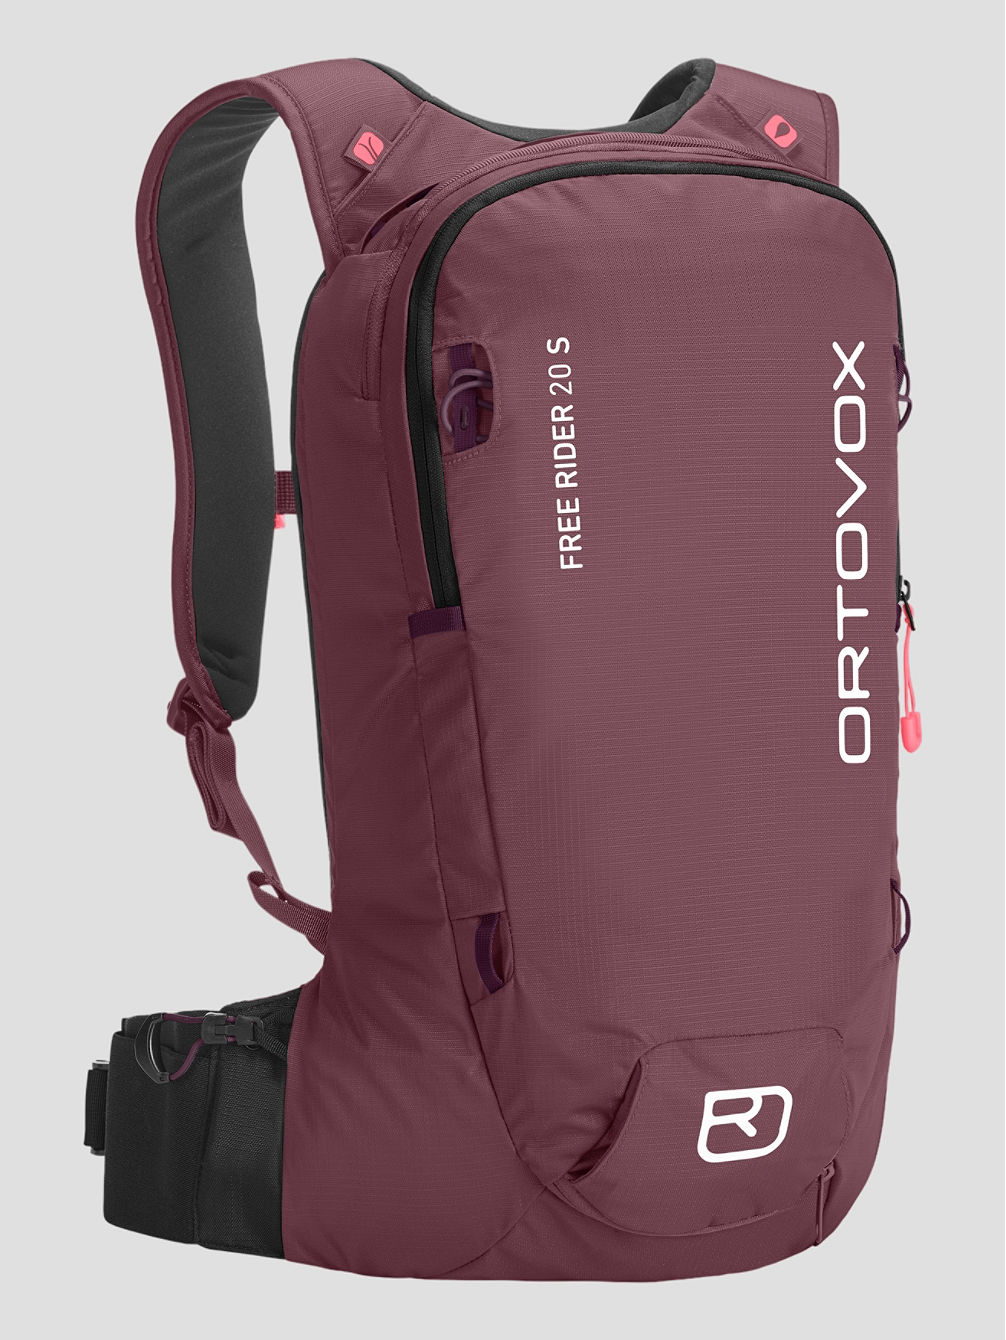 Free Rider 20L S Backpack